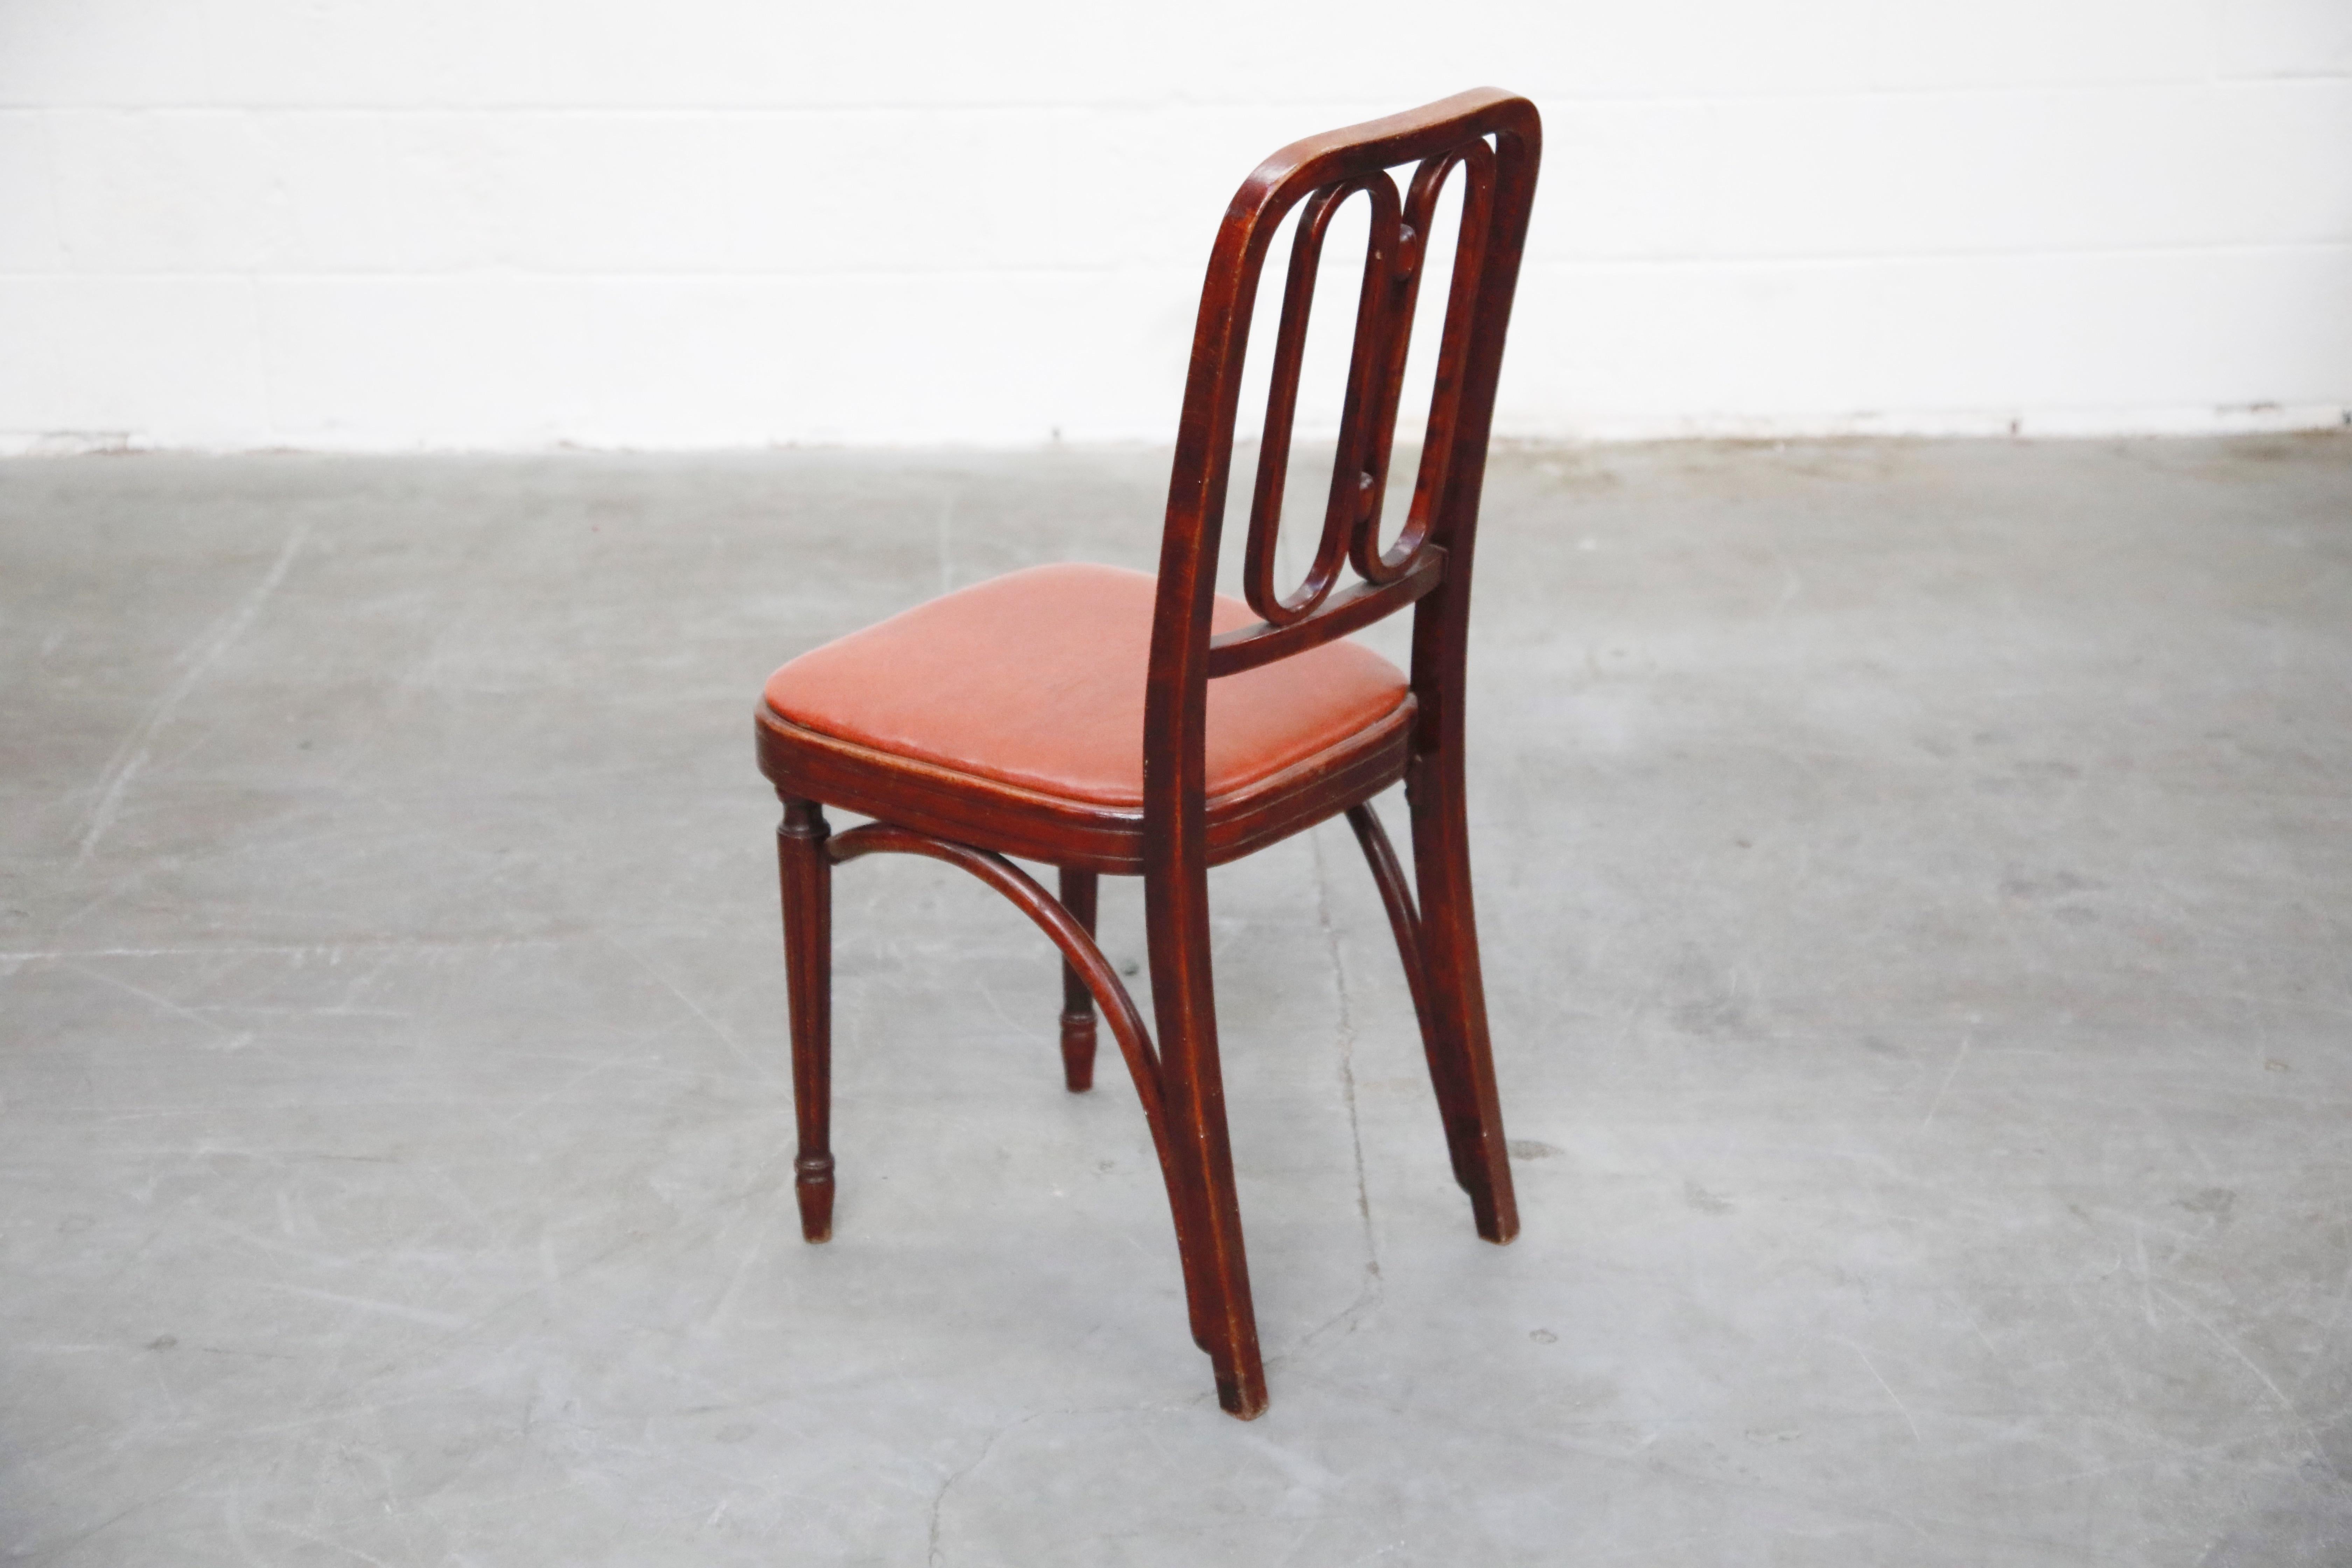 Early 20th Century Bentwood Dining Chair by Josef Hoffmann for Thonet, circa 1920s, Signed